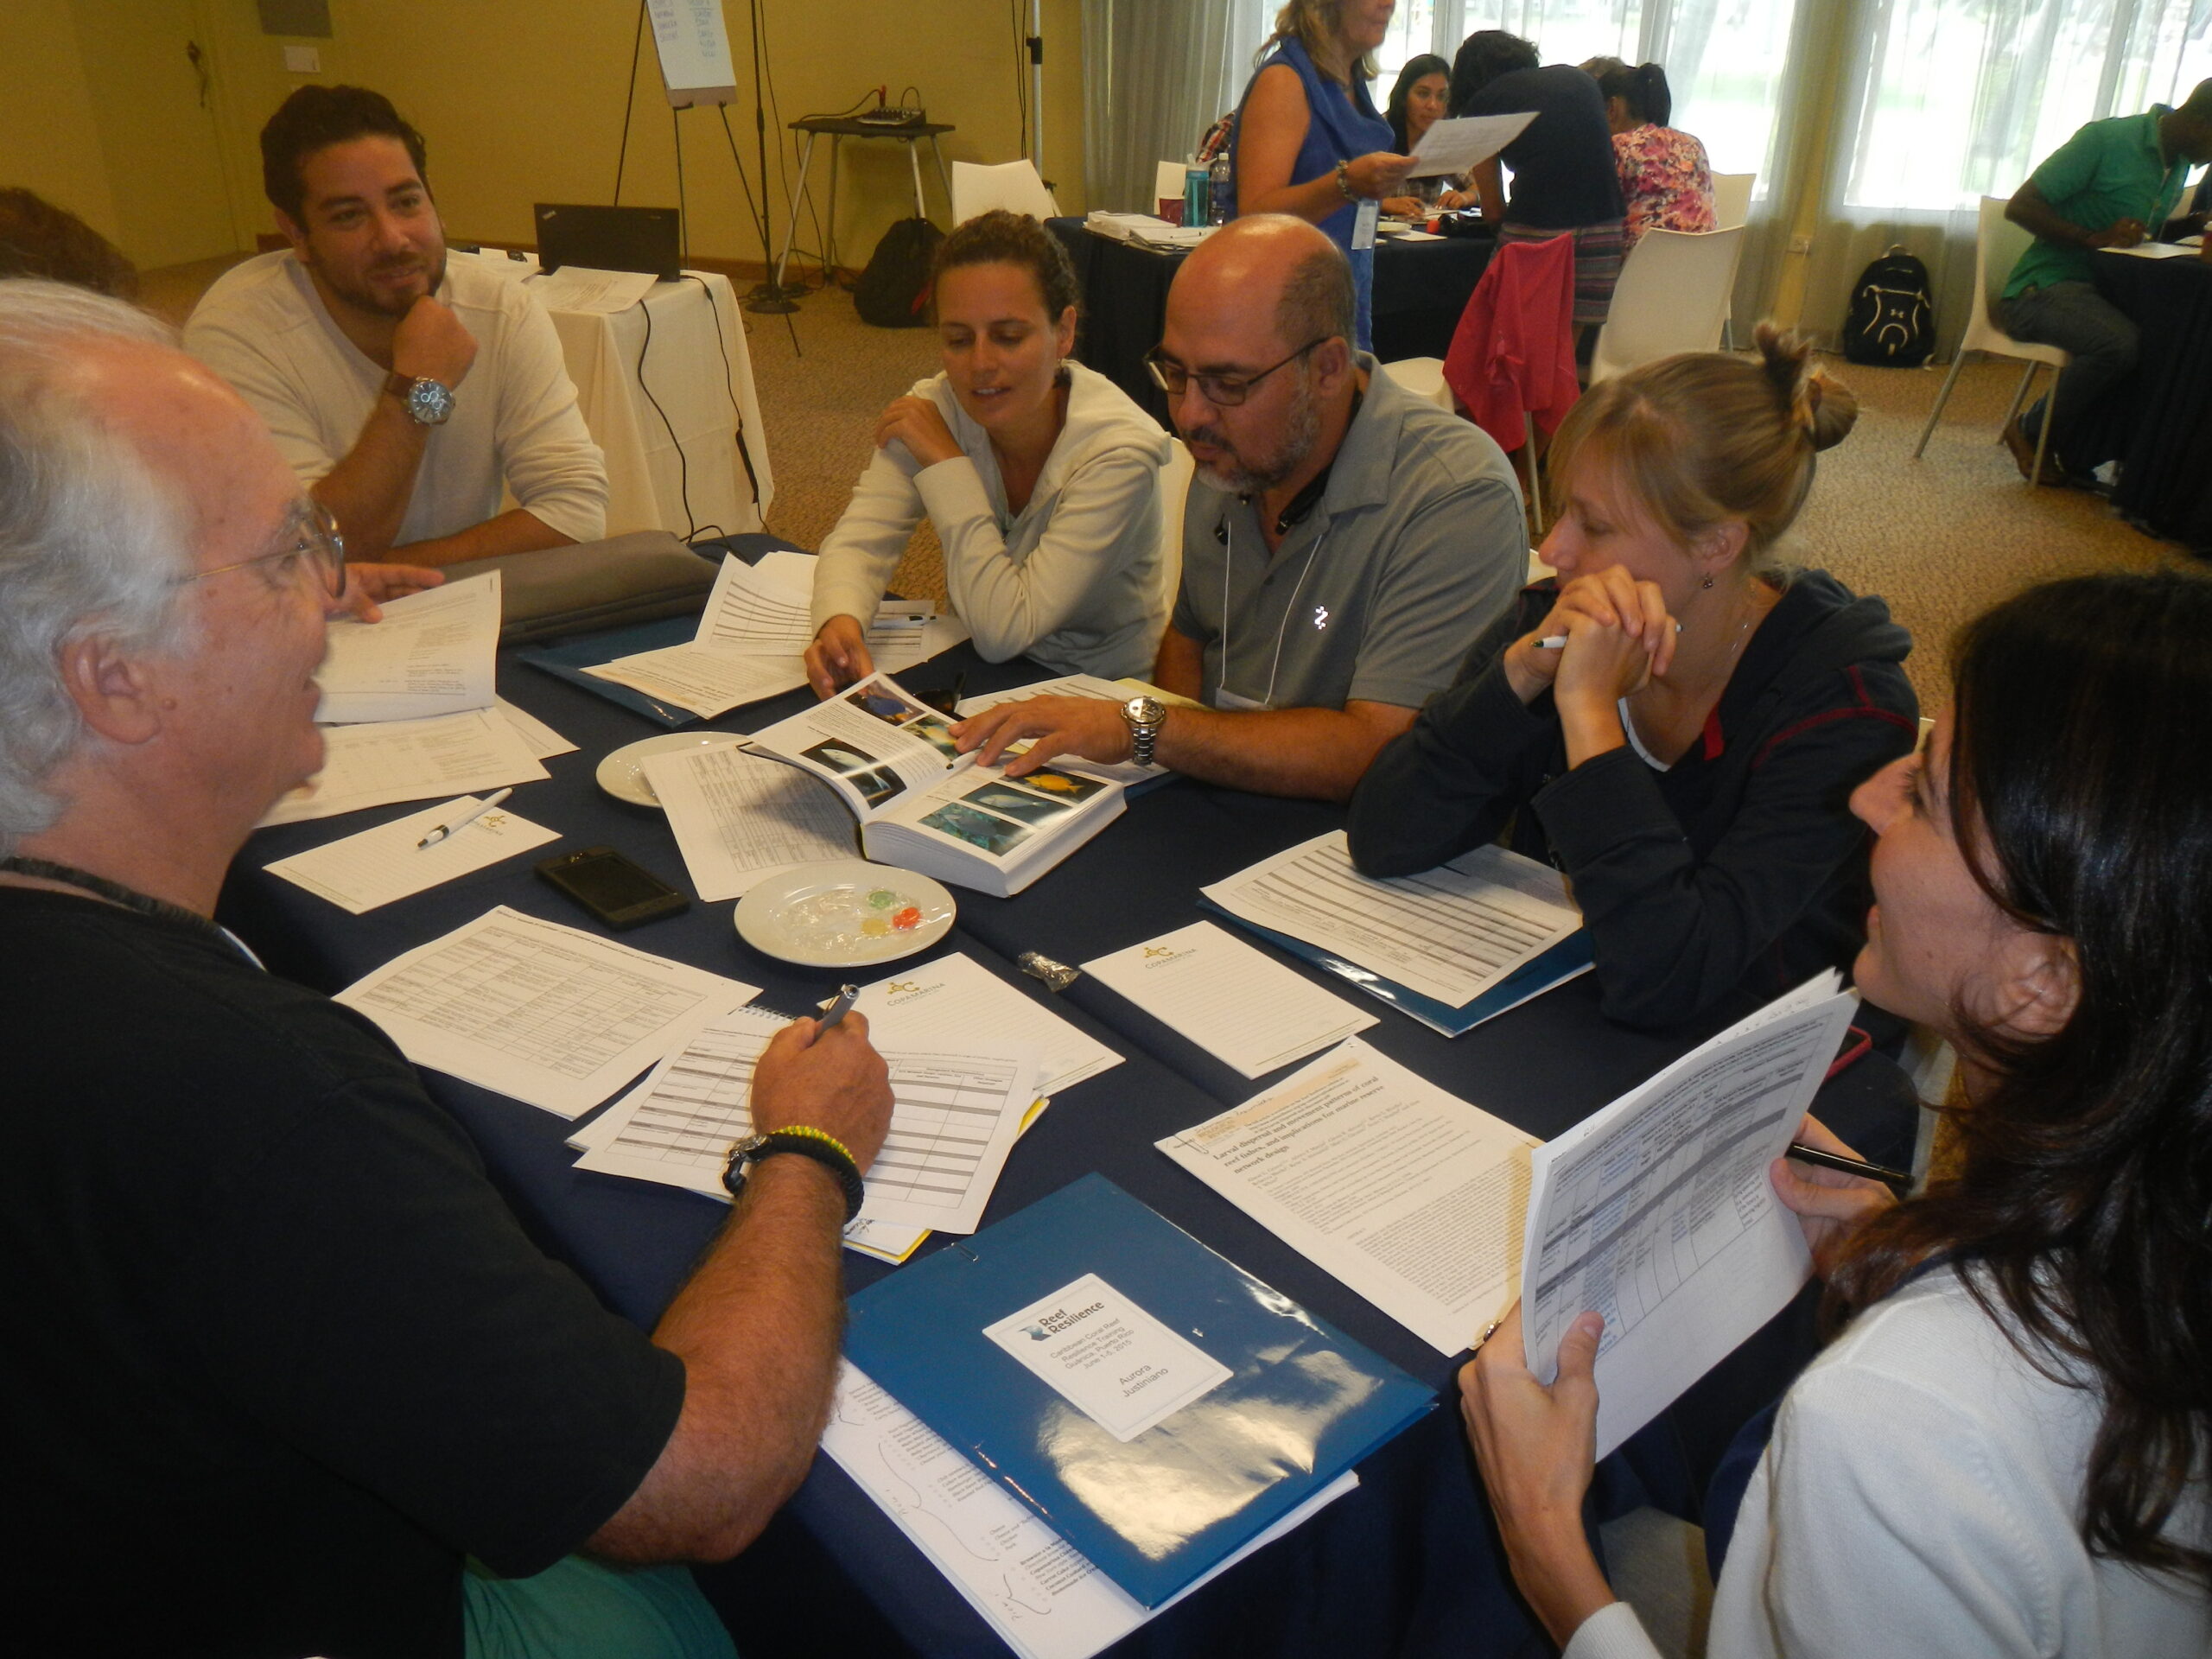 Paco (third from right) at the 2015 Puerto Rico Resilience Training. Photo © Reef Resilience Network